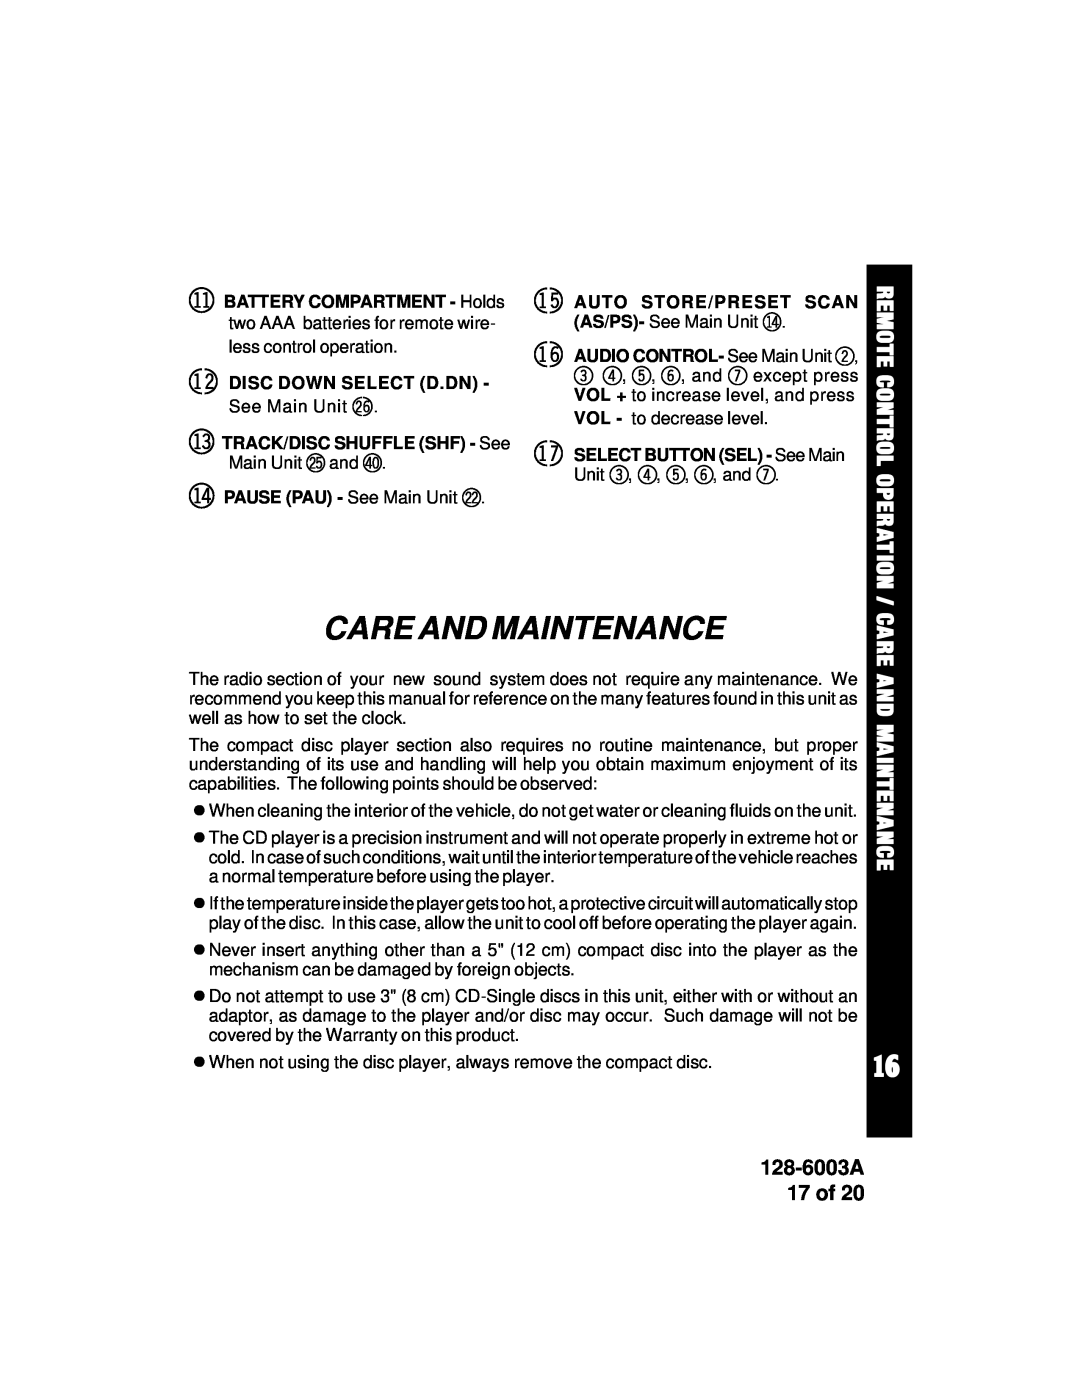 Audiovox ACD83 owner manual Care And Maintenance, 128-6003A 17 of, Remote Control Operation, bq br bs, b n bo bp 